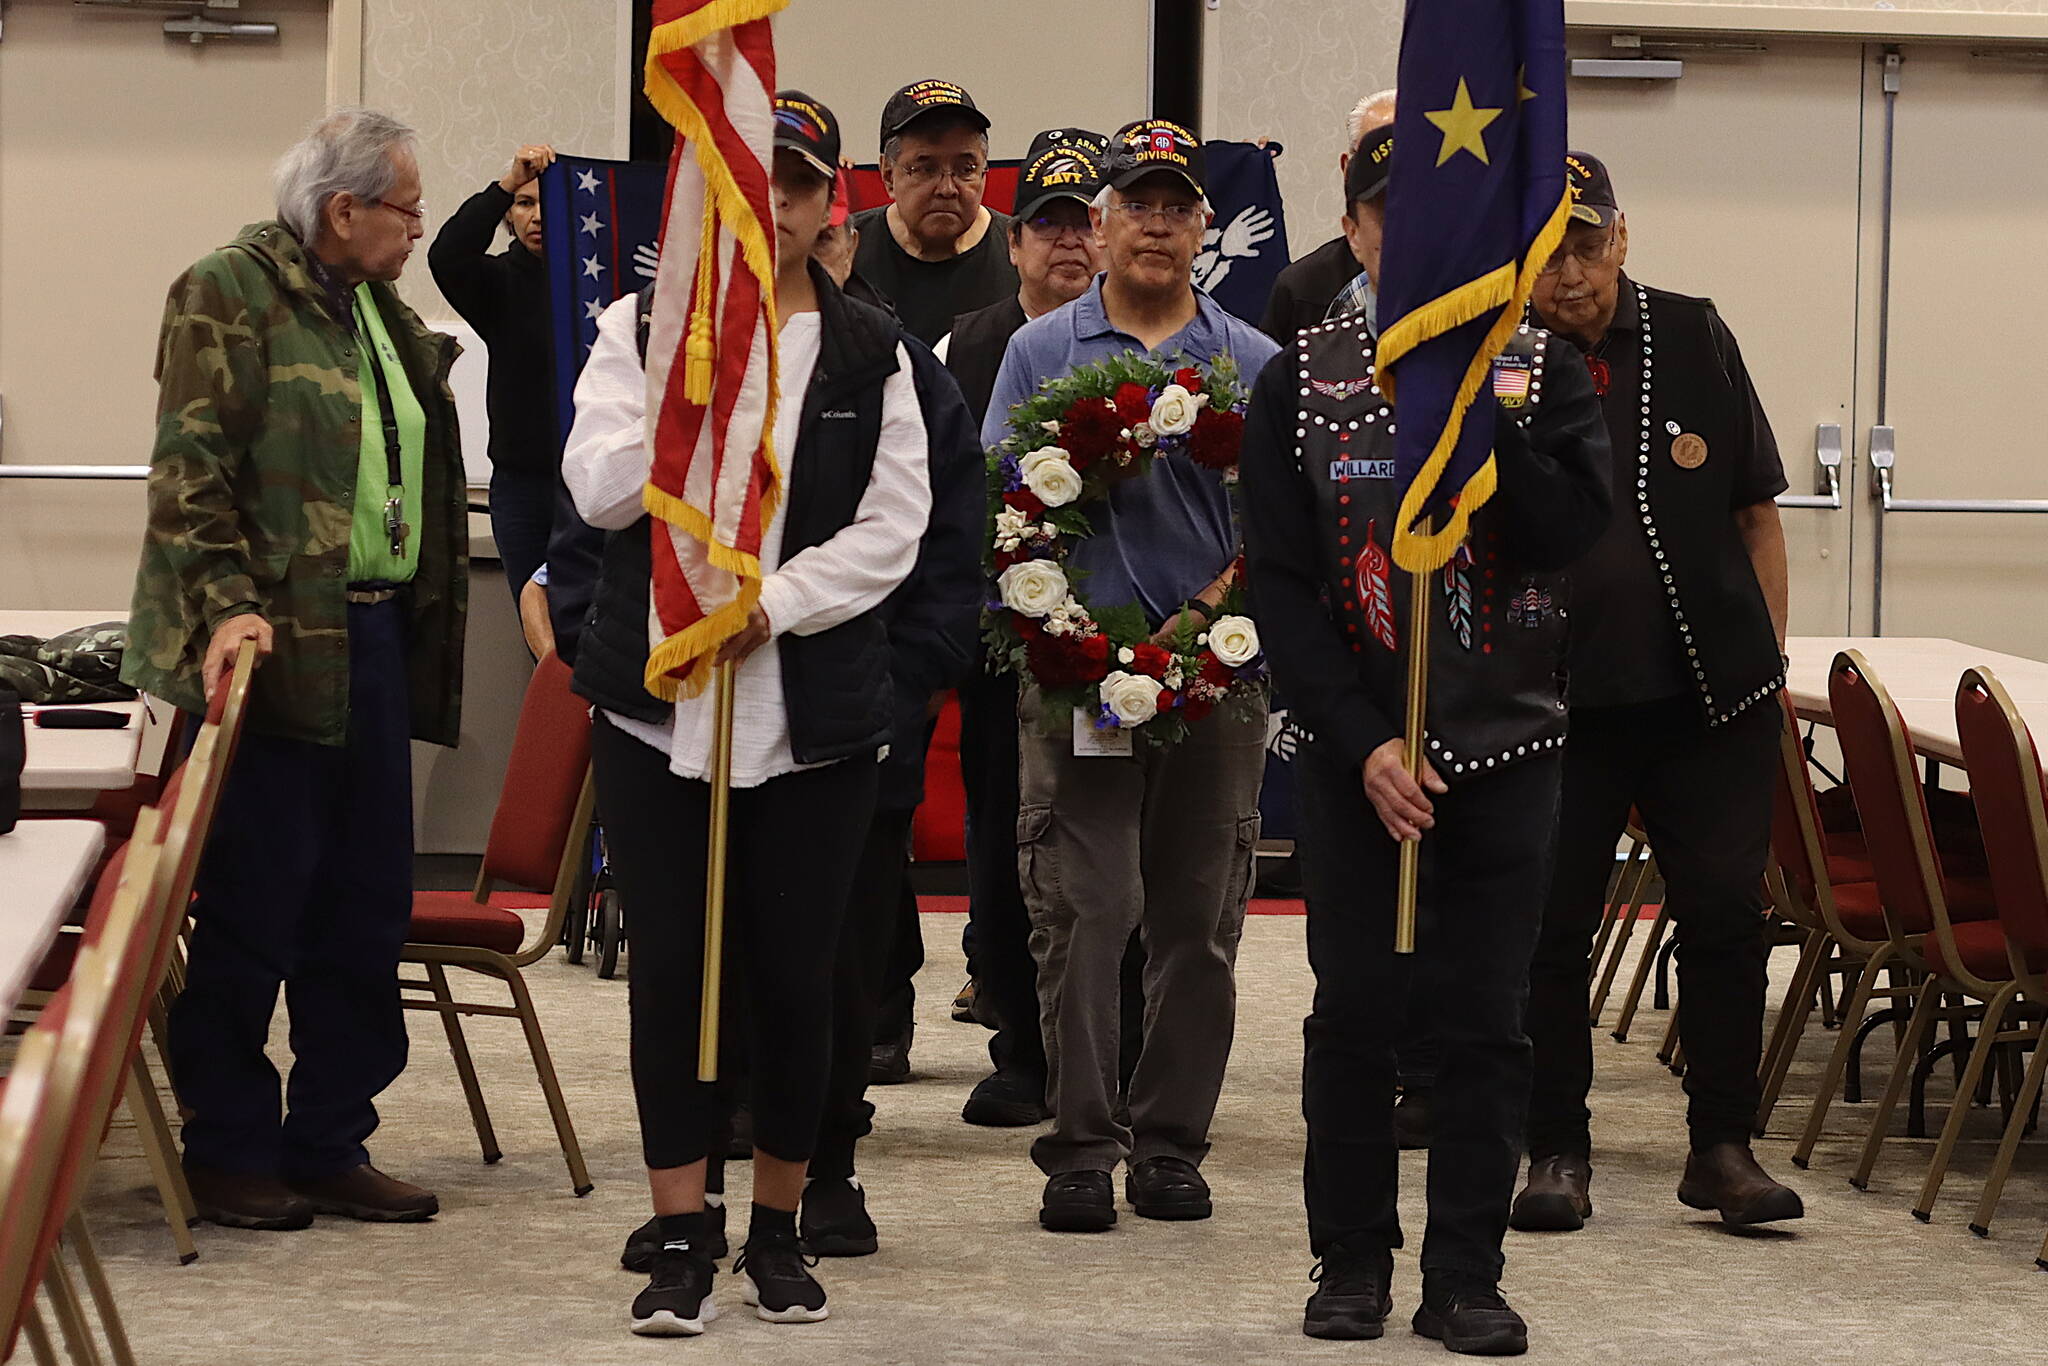 A color guard of Southeast Alaska Native Veterans carries flags to the stage at Elizabeth Peratrovich Hall during a Memorial Day commemoration Monday. (Mark Sabbatini / Juneau Empire)